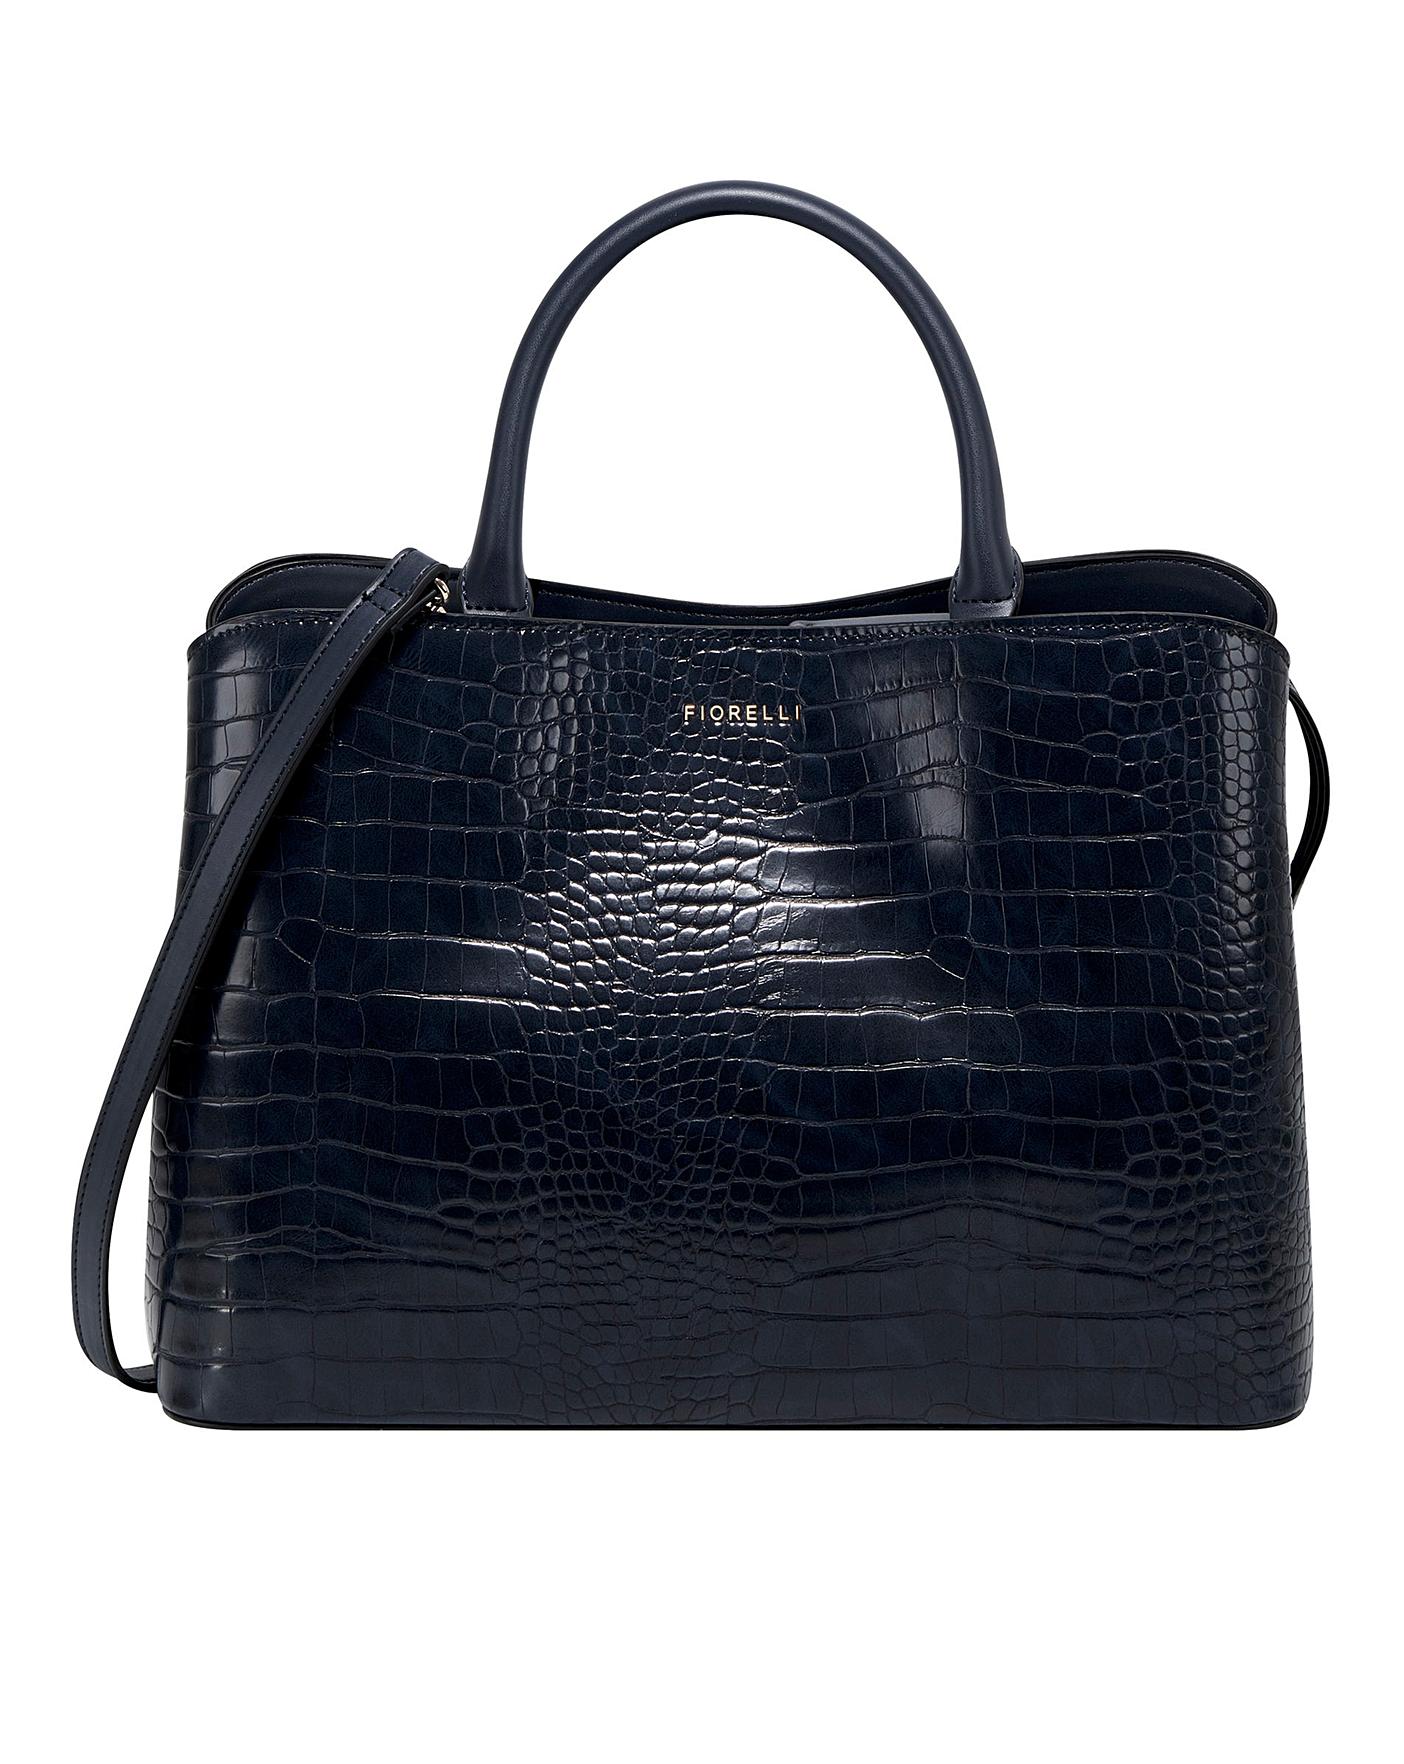 Fiorelli Bethnal Navy Croc Tote Bag | Oxendales